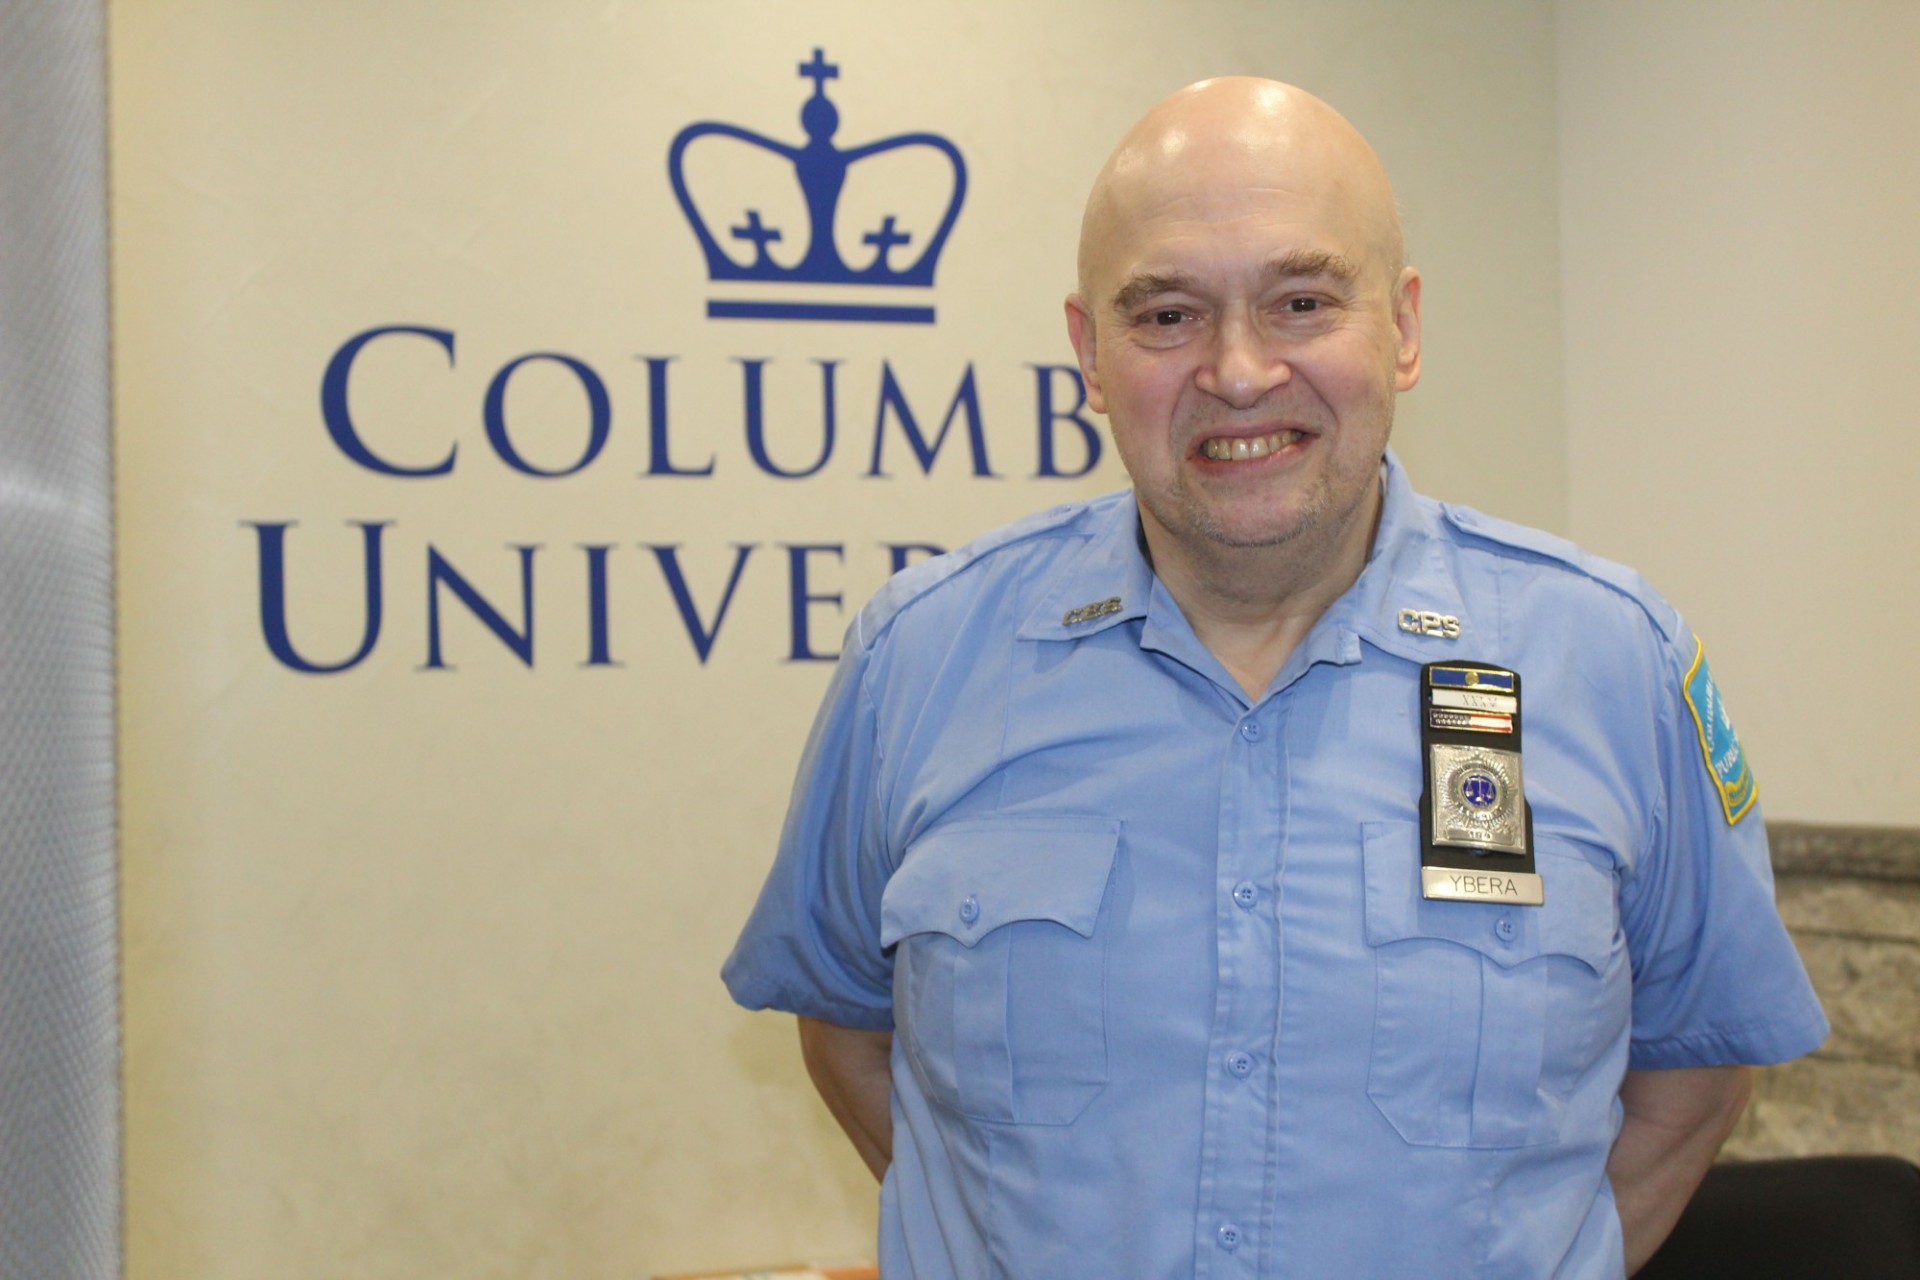 Public Safety Security Officer Benny Ybera poses for a photo in front of white wall with Columbia University logo.